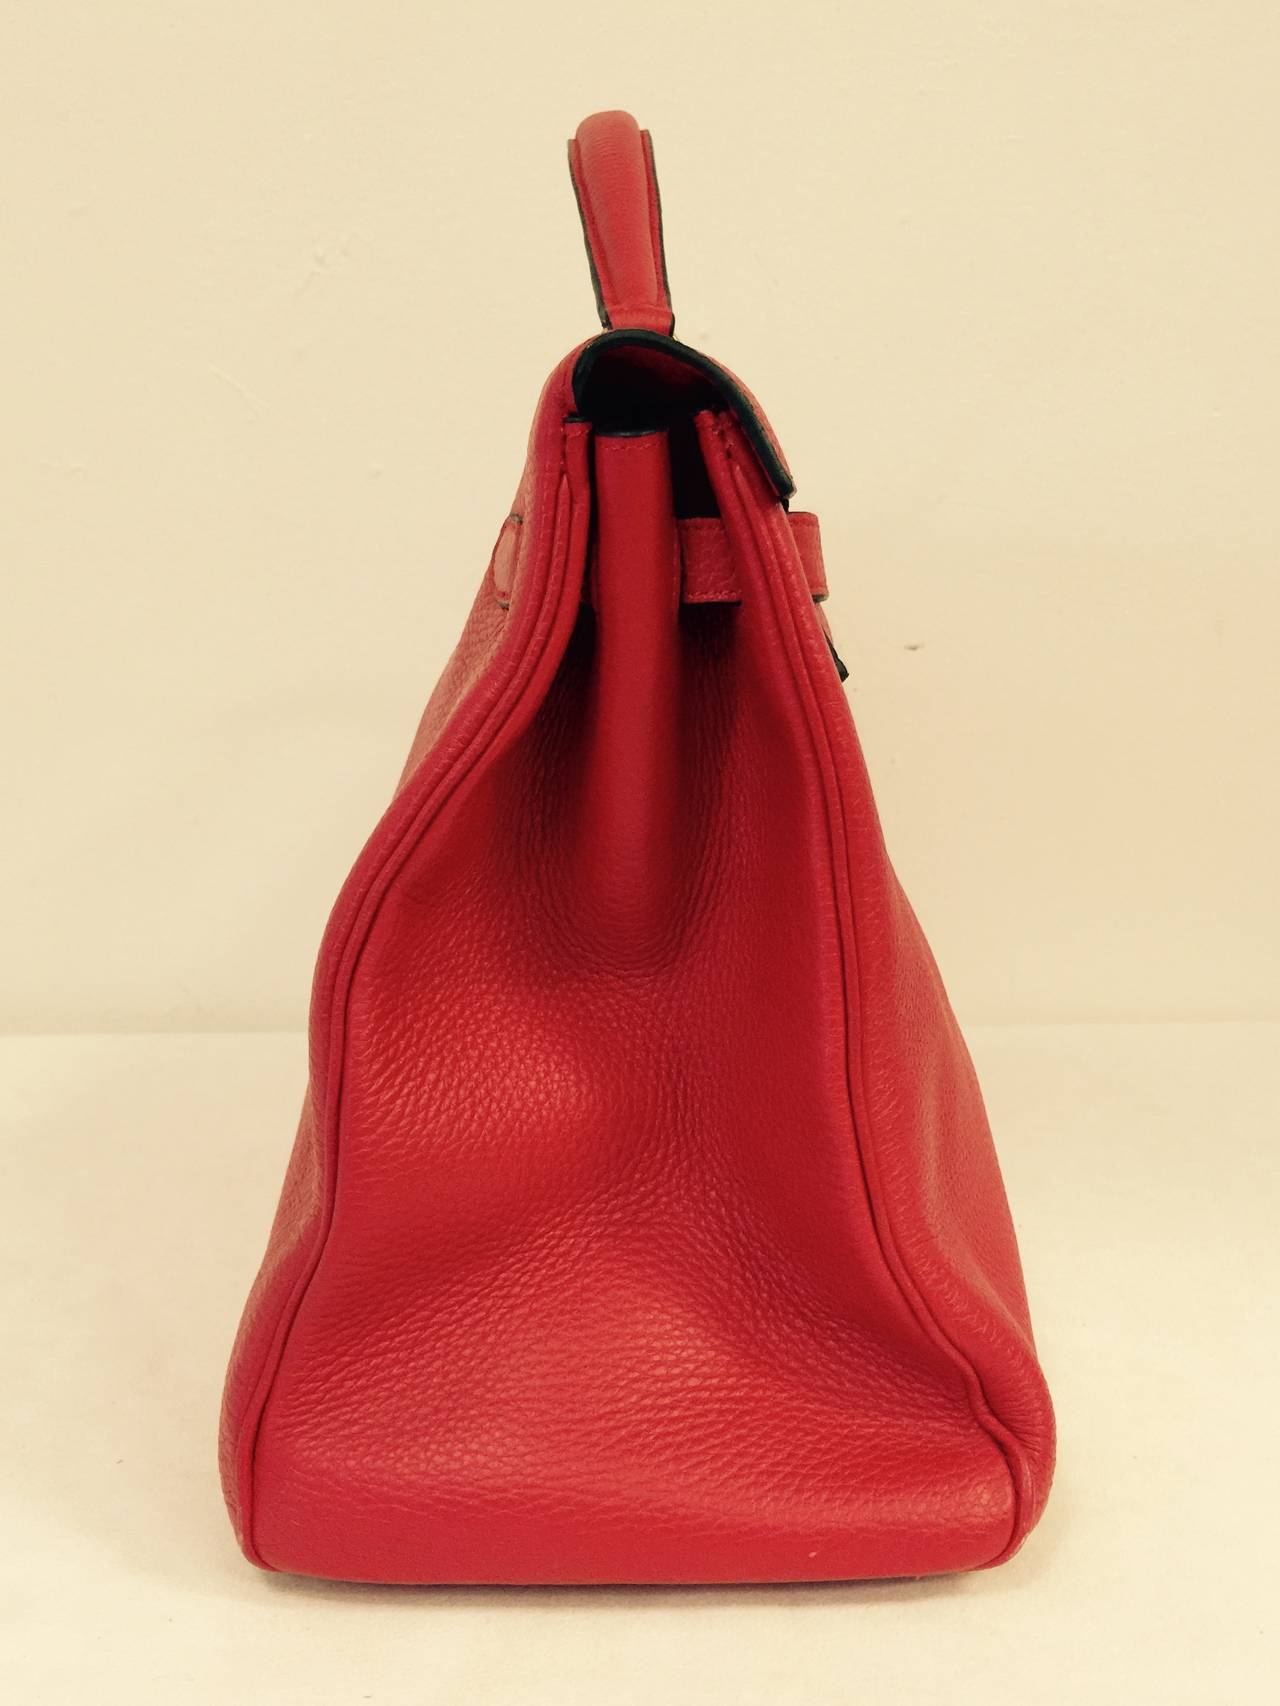 2008 Hermes Kelly Red Togo Bag 50 In Excellent Condition For Sale In Palm Beach, FL